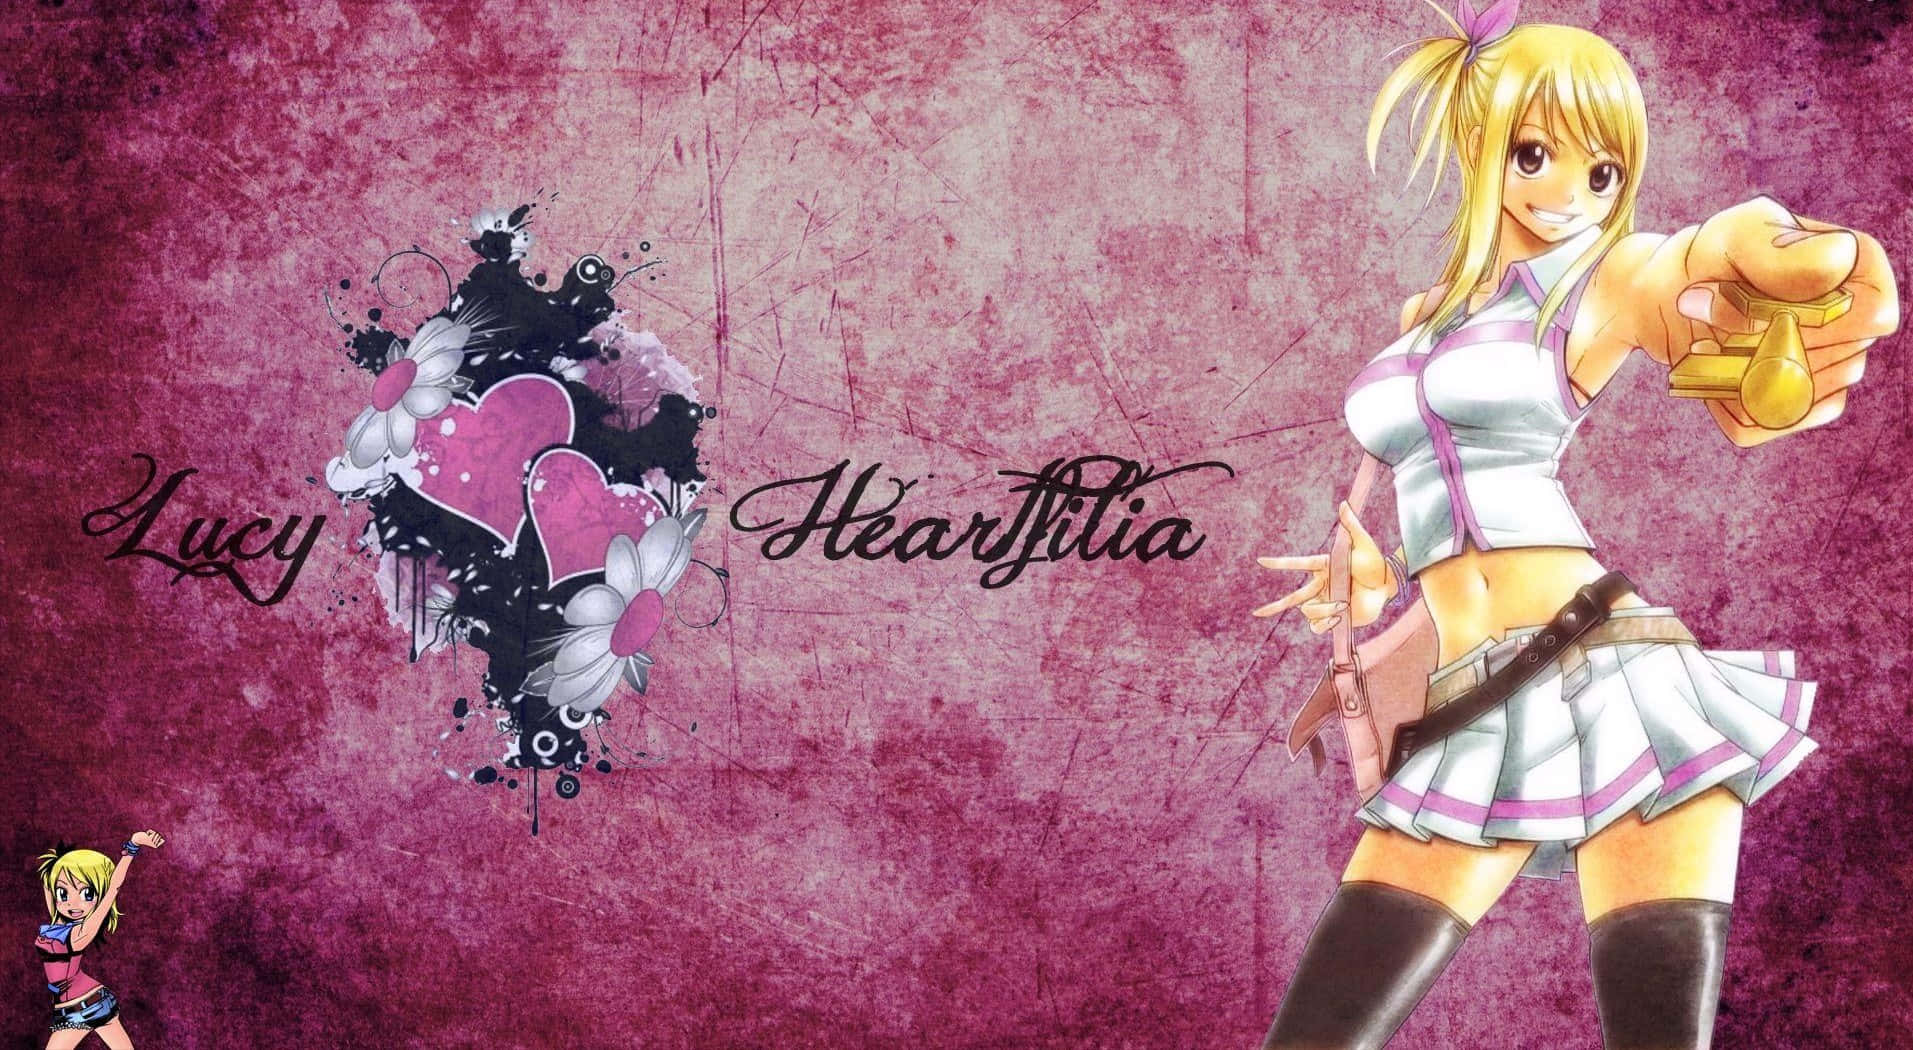 Stunning Lucy Heartfilia In Action